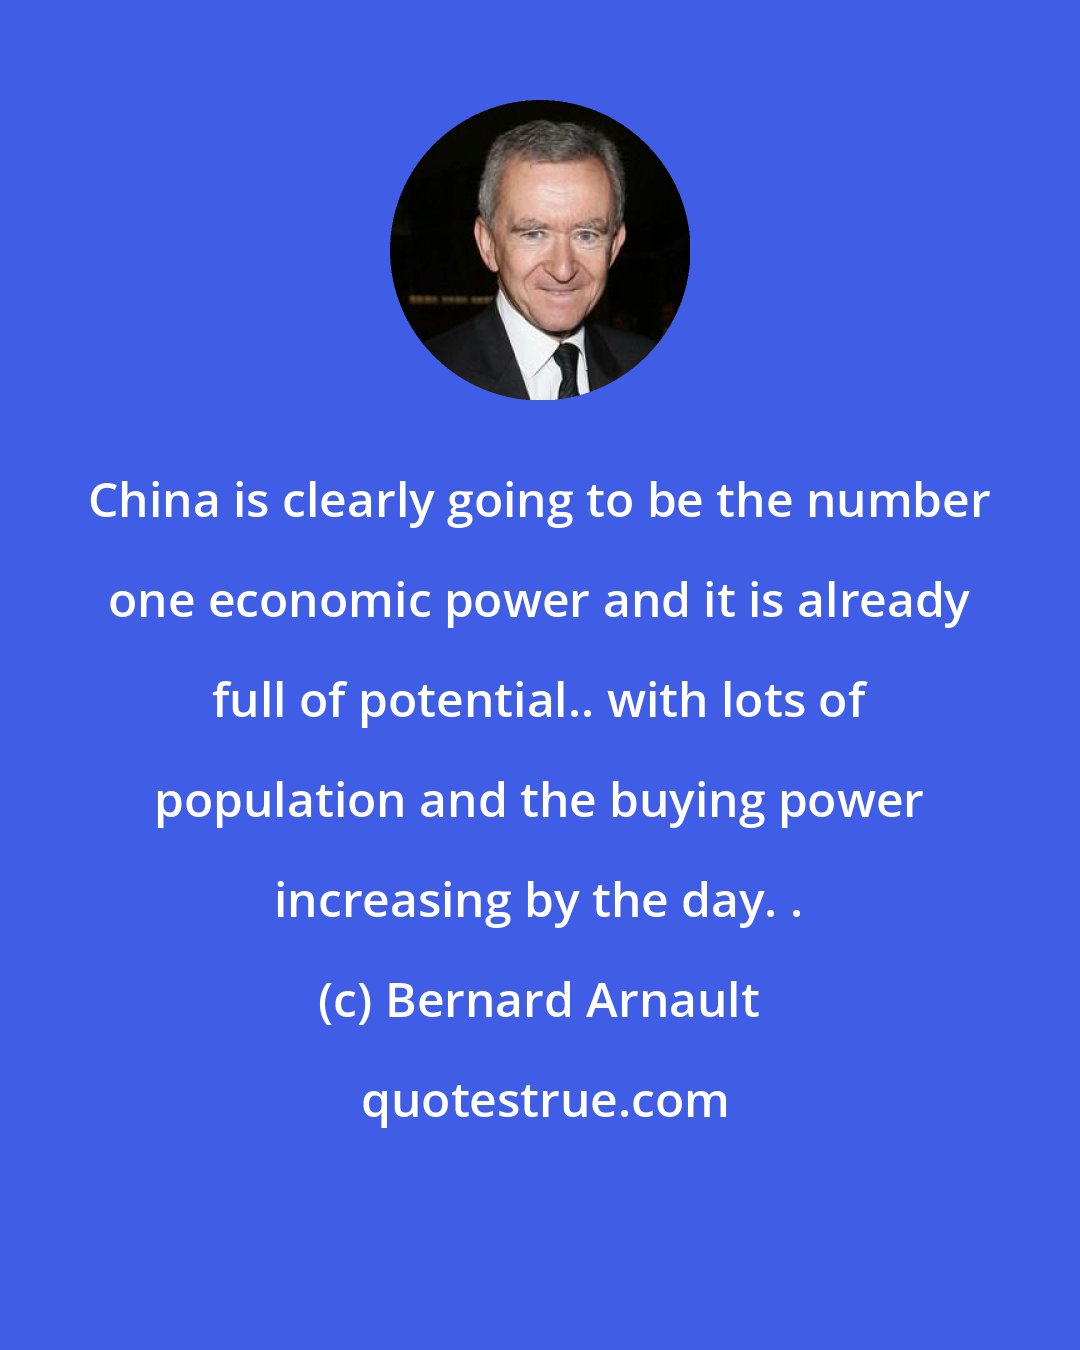 Bernard Arnault: China is clearly going to be the number one economic power and it is already full of potential.. with lots of population and the buying power increasing by the day. .